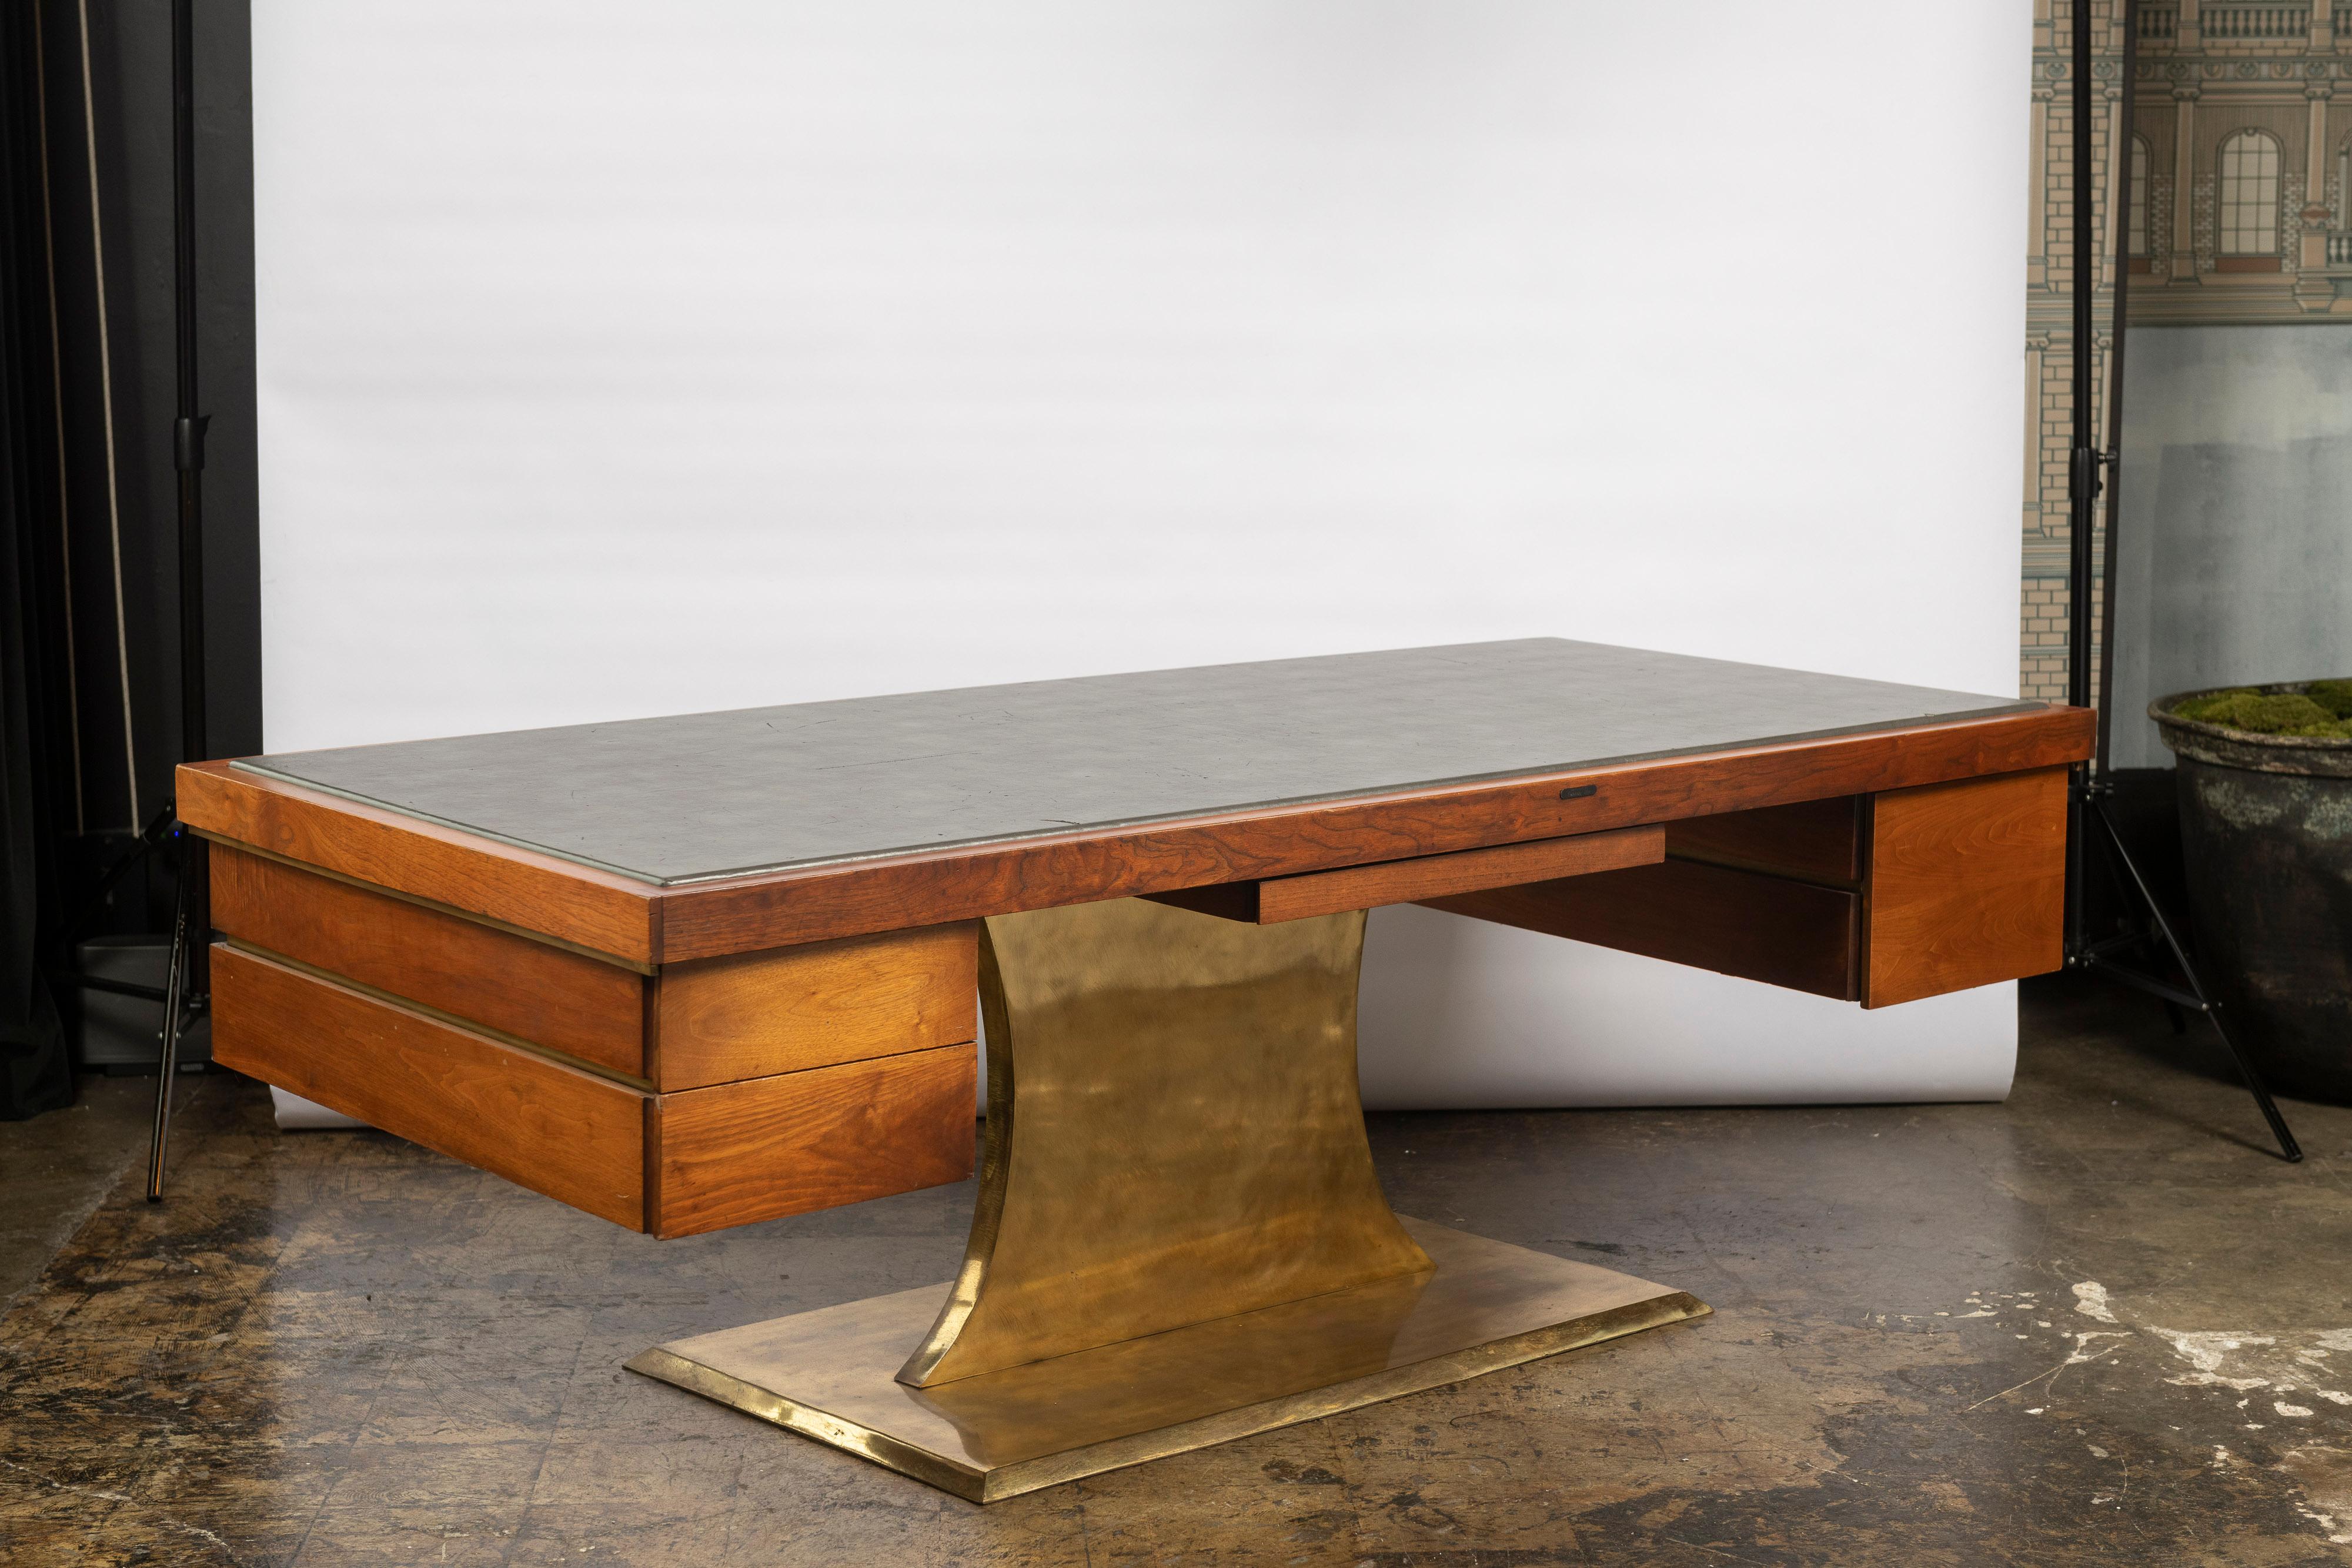 Rare monumental desk by Harvey Probber in walnut, brass, metal fittings and leather inlaid top. Significant statement piece for an executive setting or for someone who appreciates scale and materiality. The top, two side drawers, center drawer and